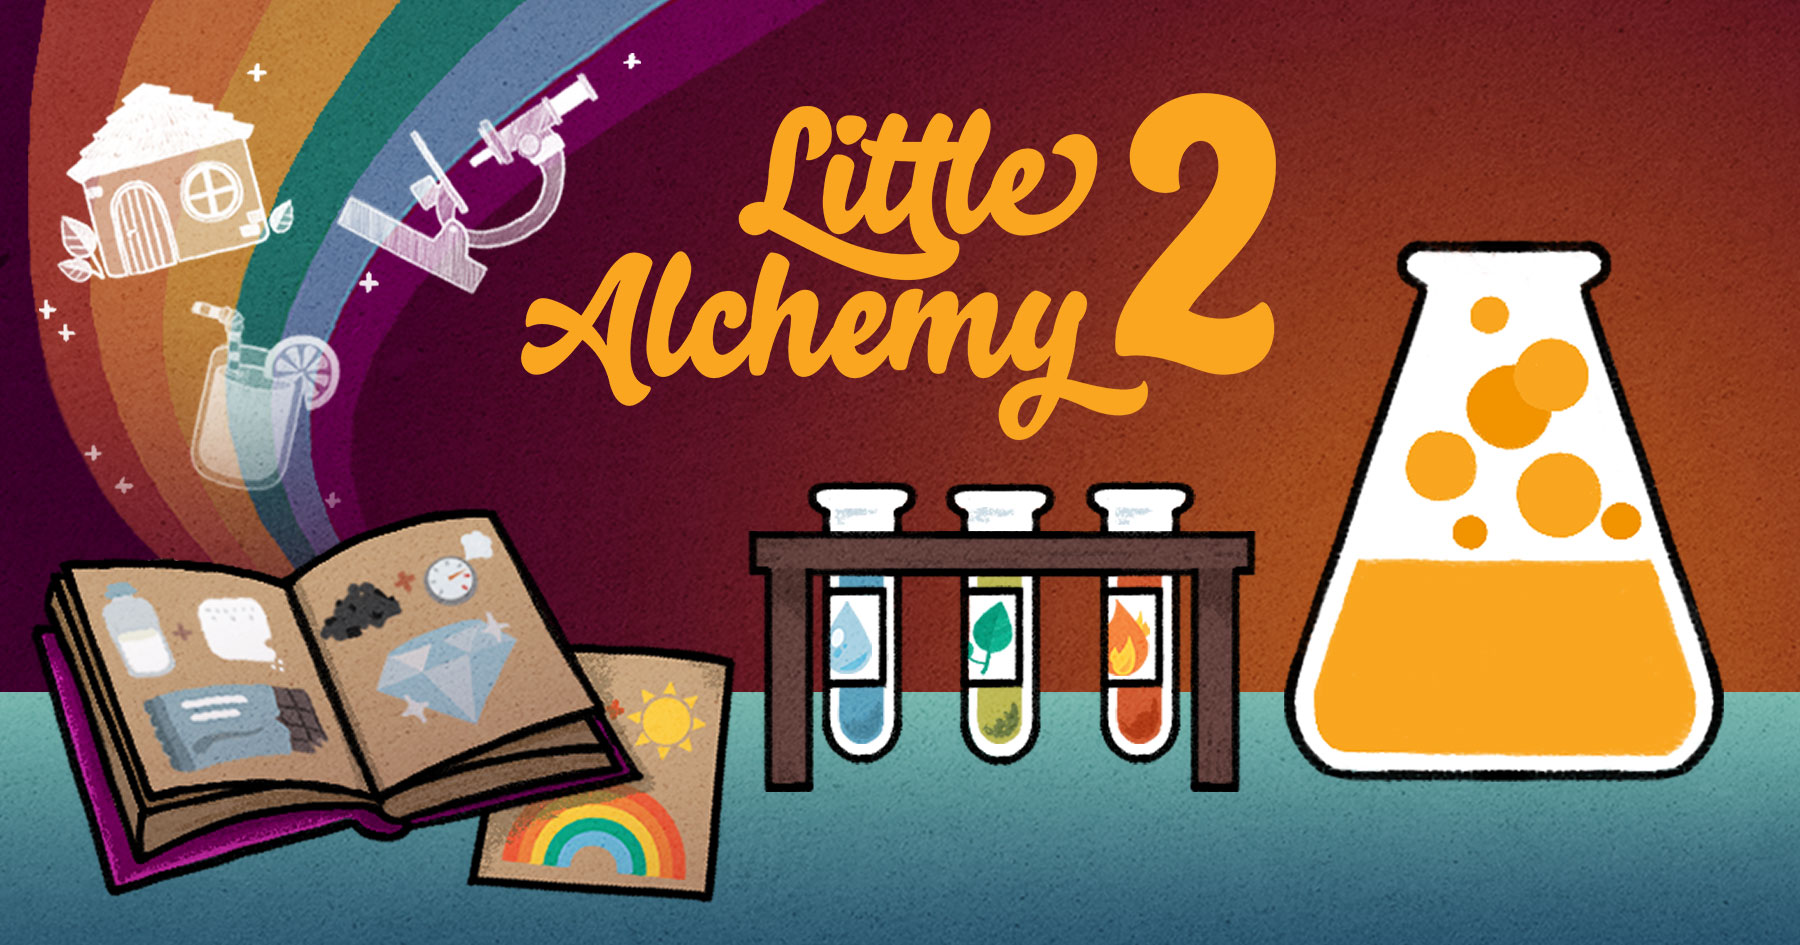 how to make cloud in little alchemy 2